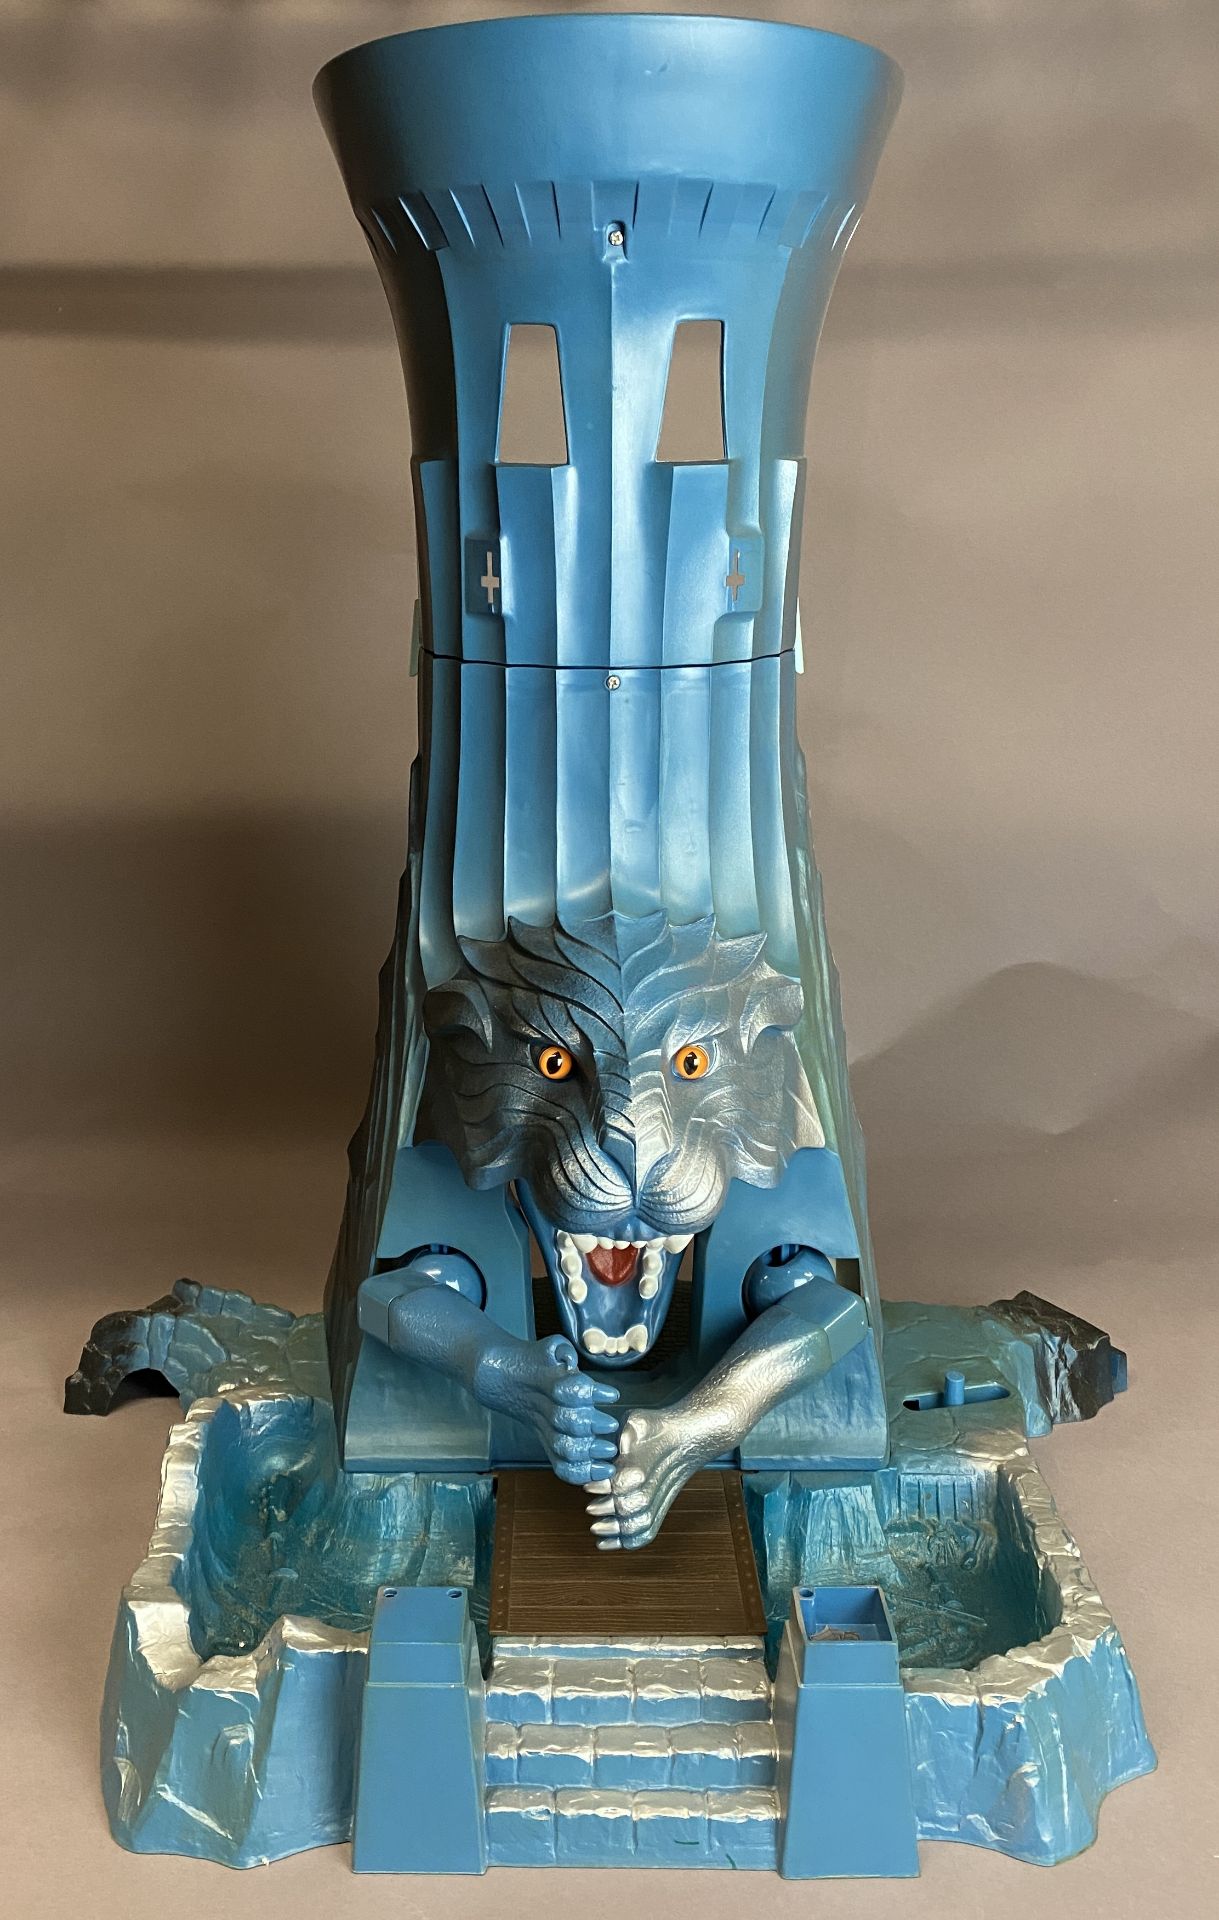 ETERNIA - Vintage Masters of the Universe Playset and Original Box (MOTU) - Appears to be complete - Image 17 of 125